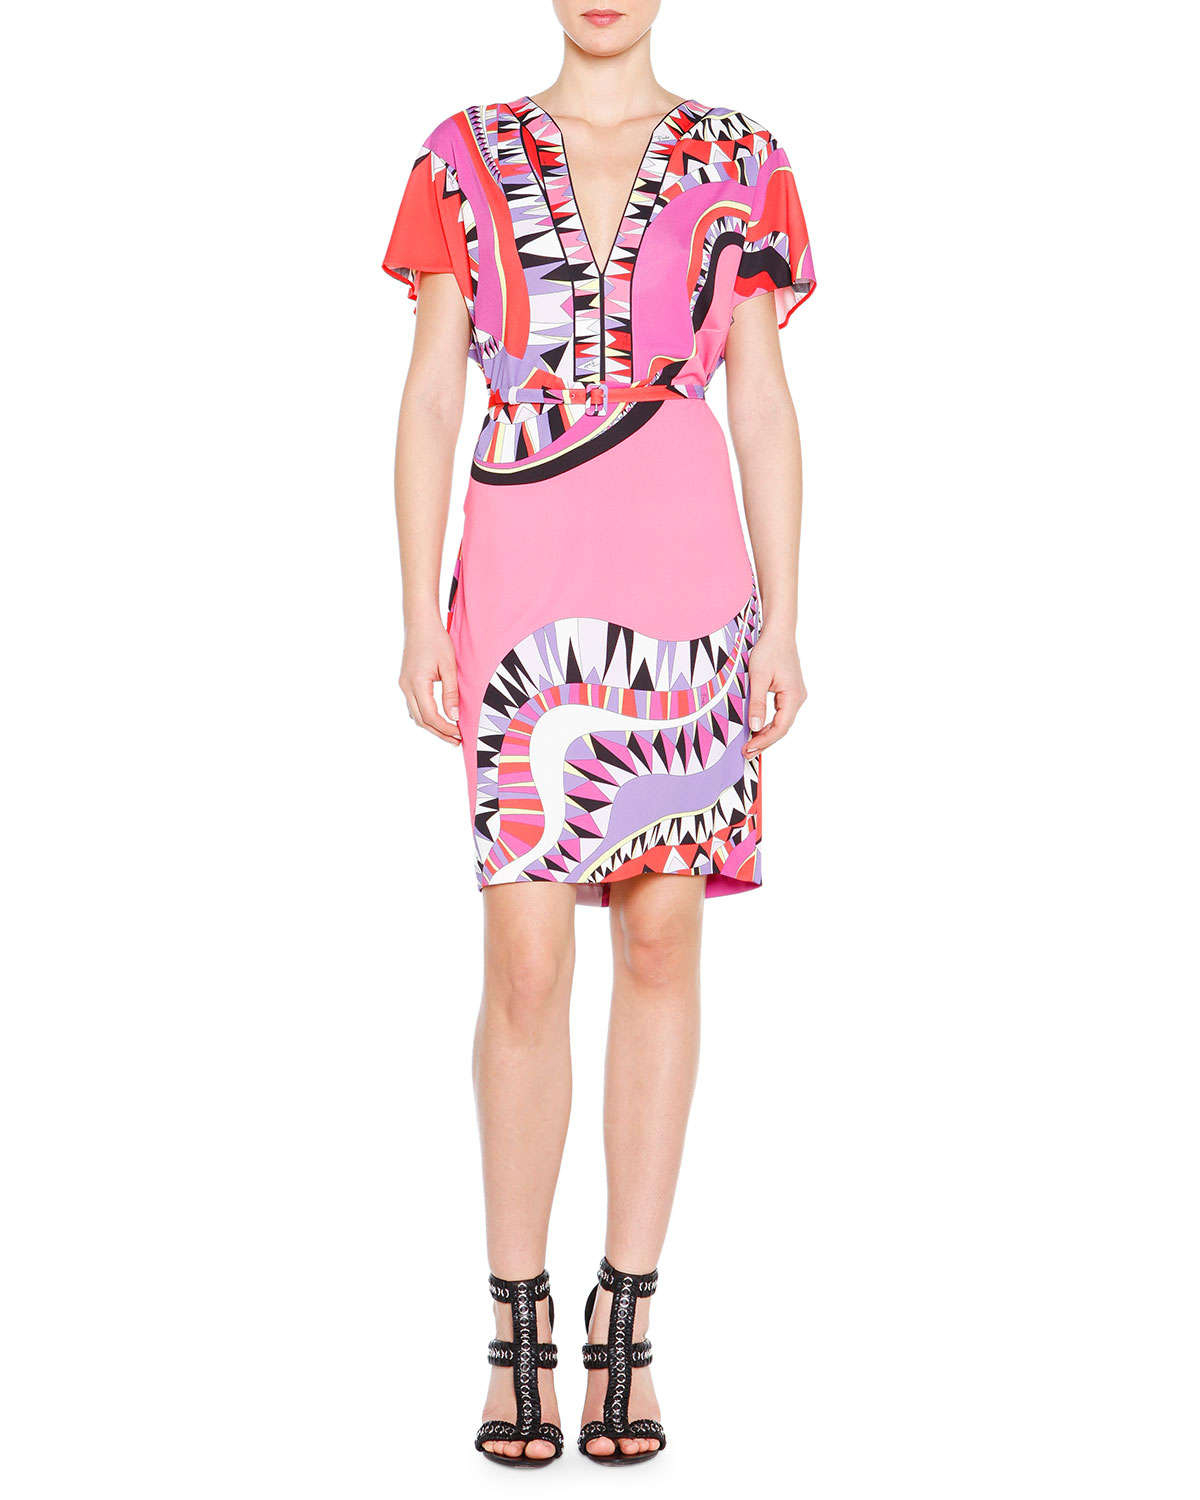 Lyst - Emilio Pucci Kaleidoscope-print Belted Dress in Pink